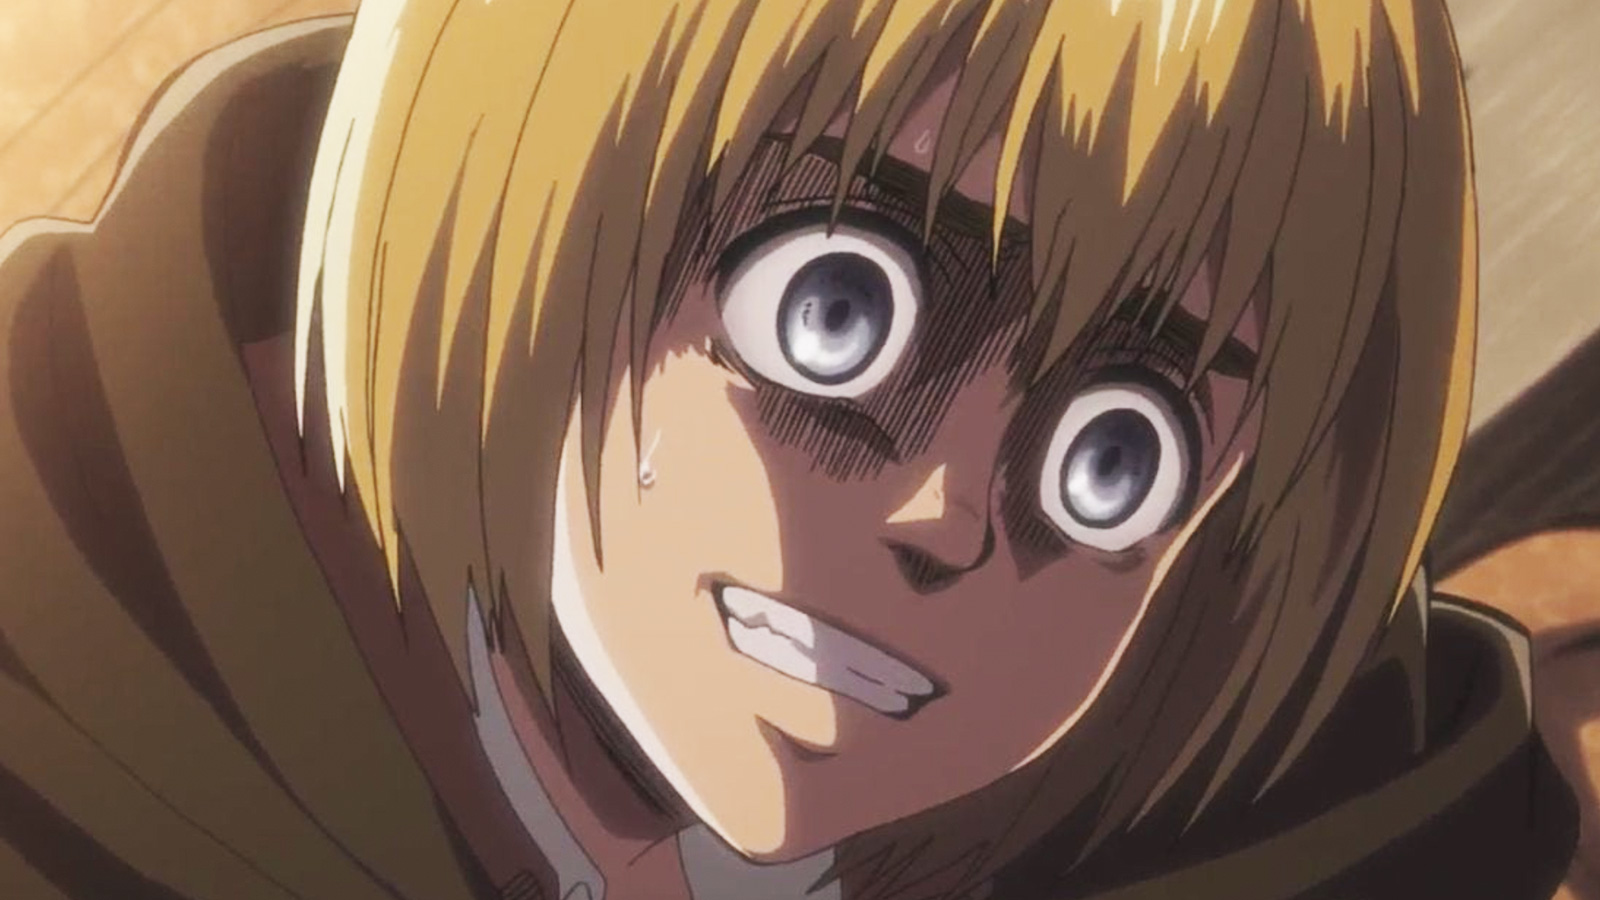 Attack on Titan fans furious over anime's “excessive” censorship - Dexerto